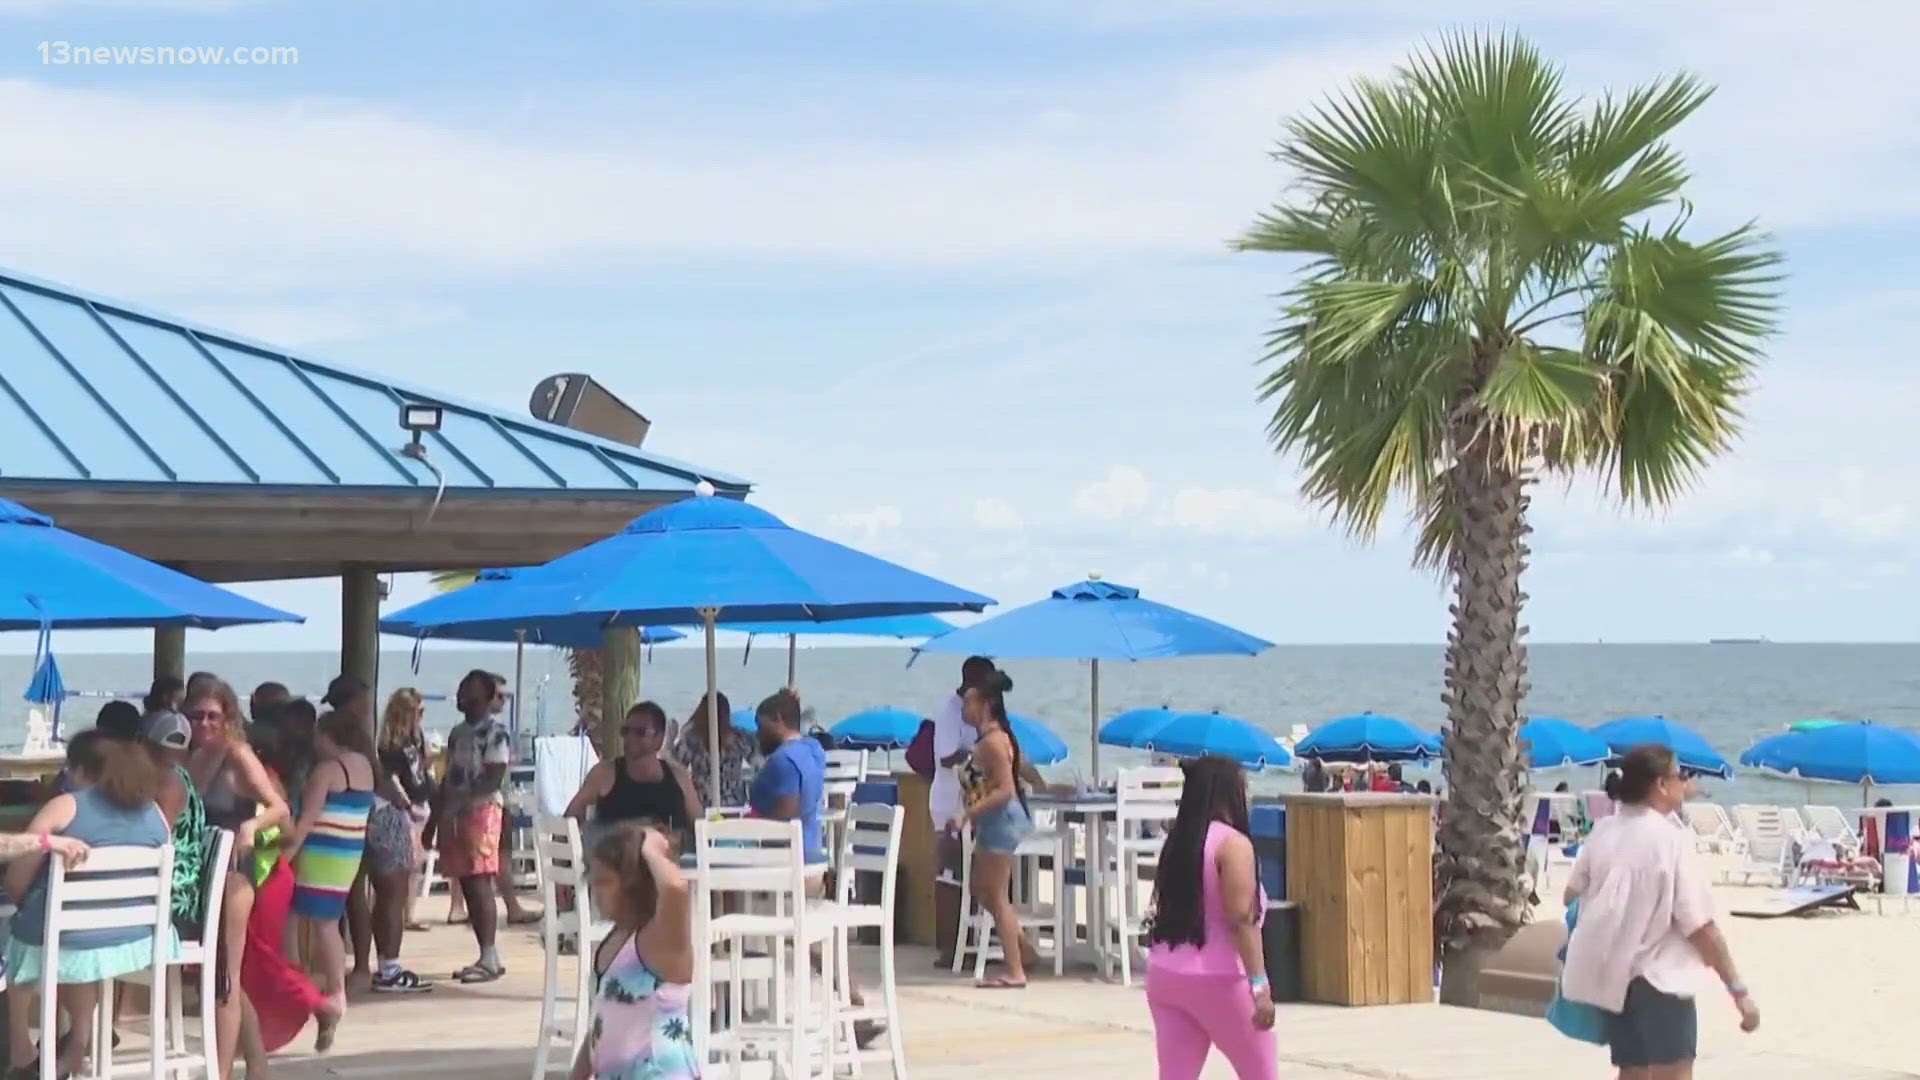 After almost two years of being closed, Paradise Ocean Club in Hampton will be opening its doors once again.